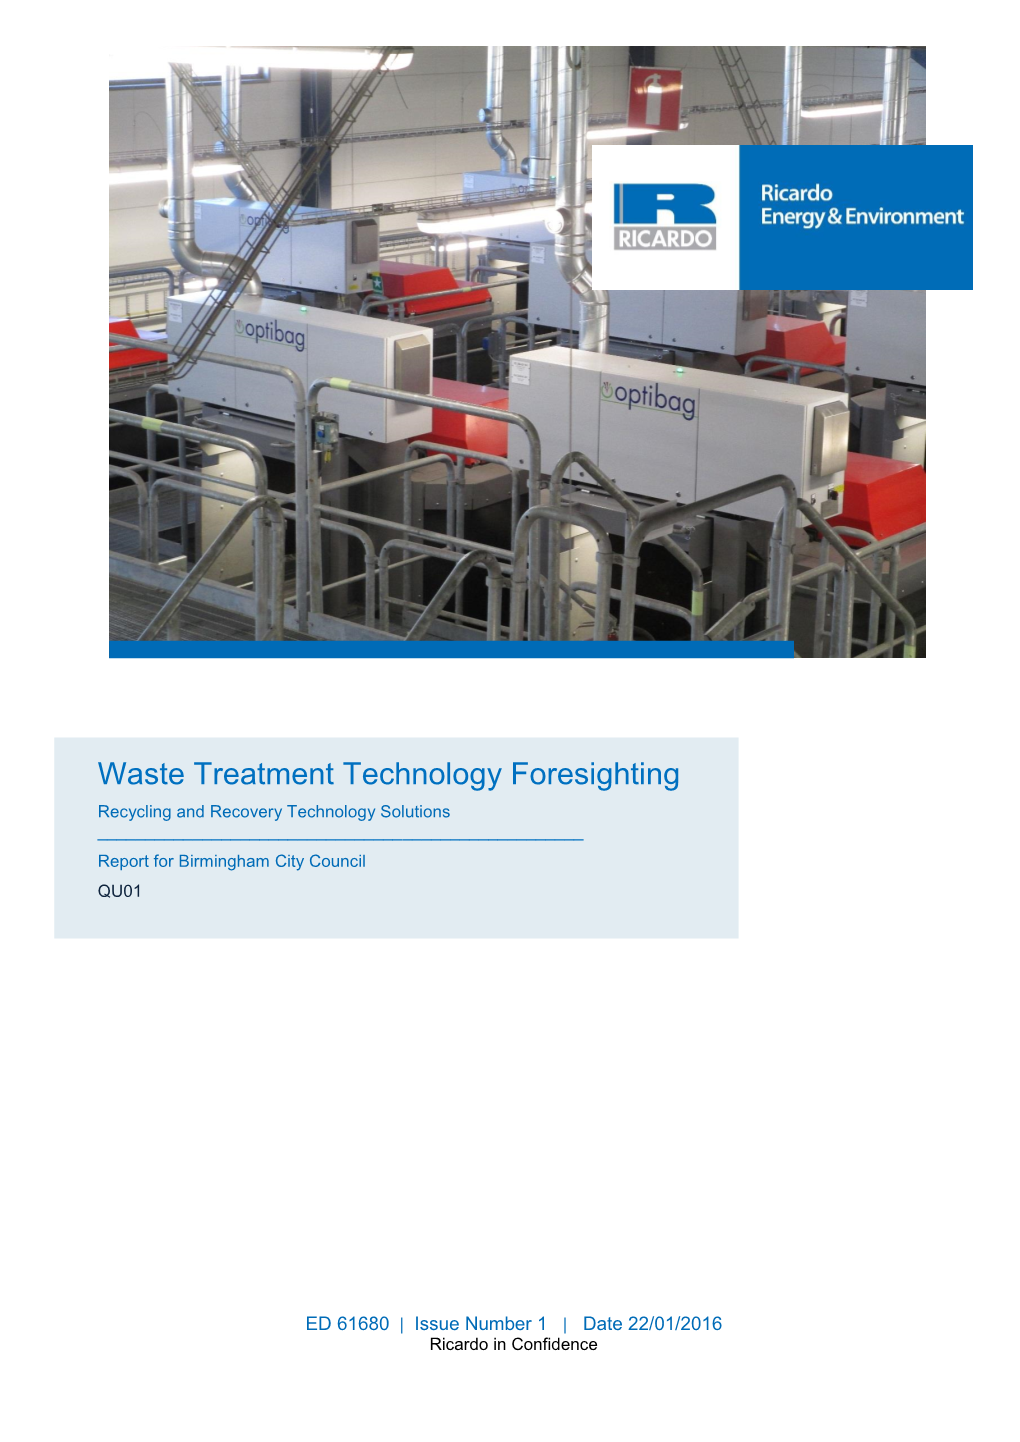 Waste Treatment Technology Foresighting Recycling and Recovery Technology Solutions ______Report for Birmingham City Council QU01